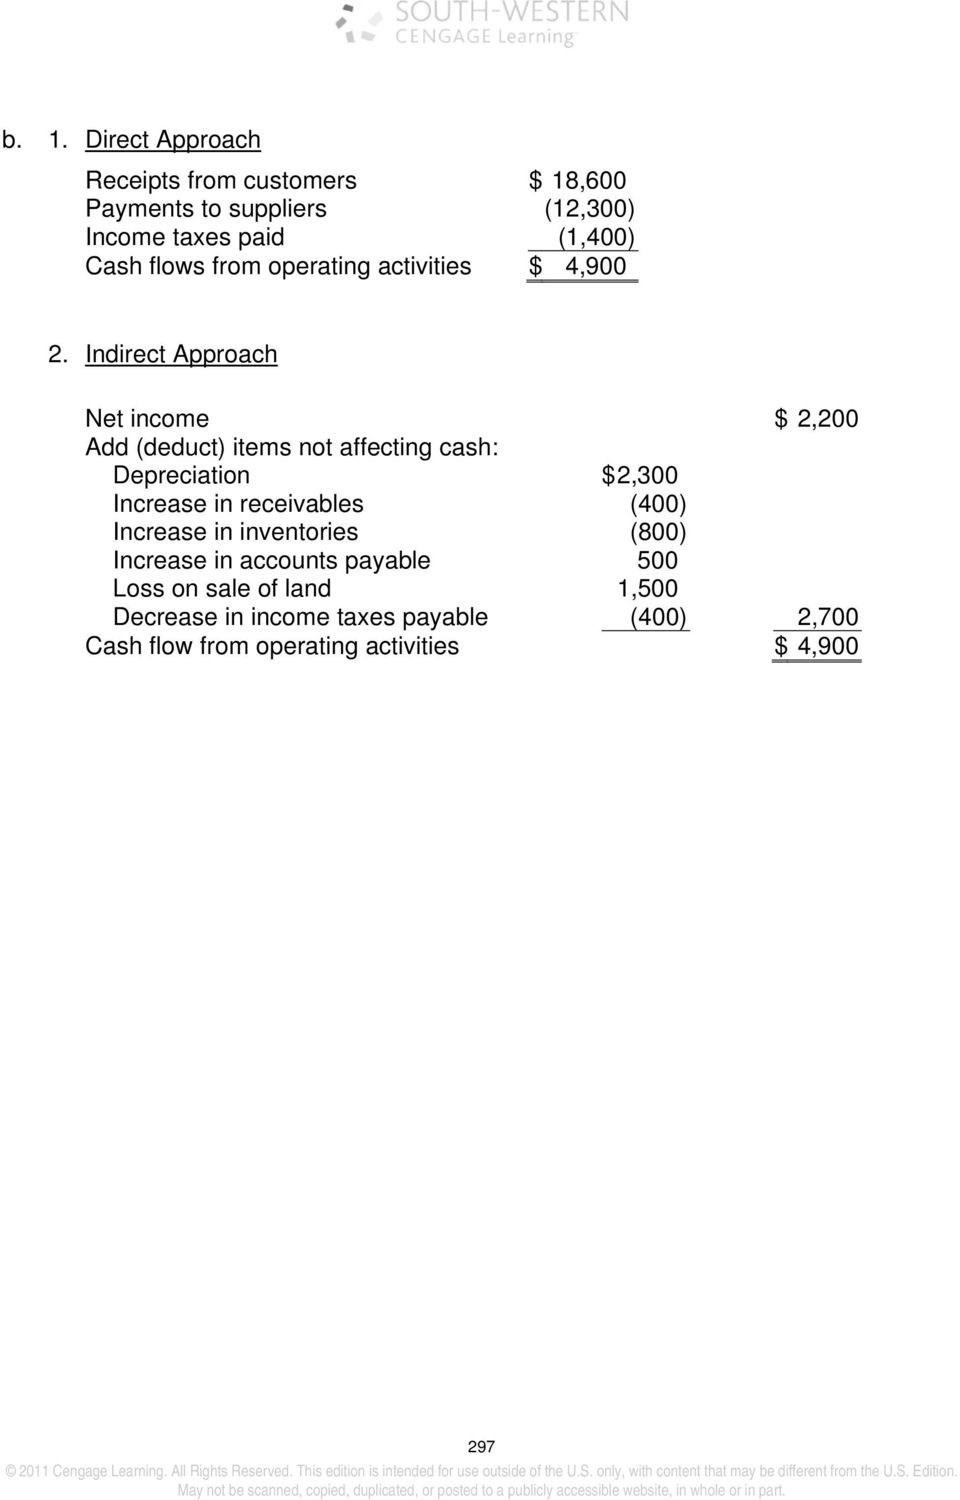 Indirect Approach Net income $ 2,200 Add (deduct) items not affecting cash: Depreciation $2,300 Increase in